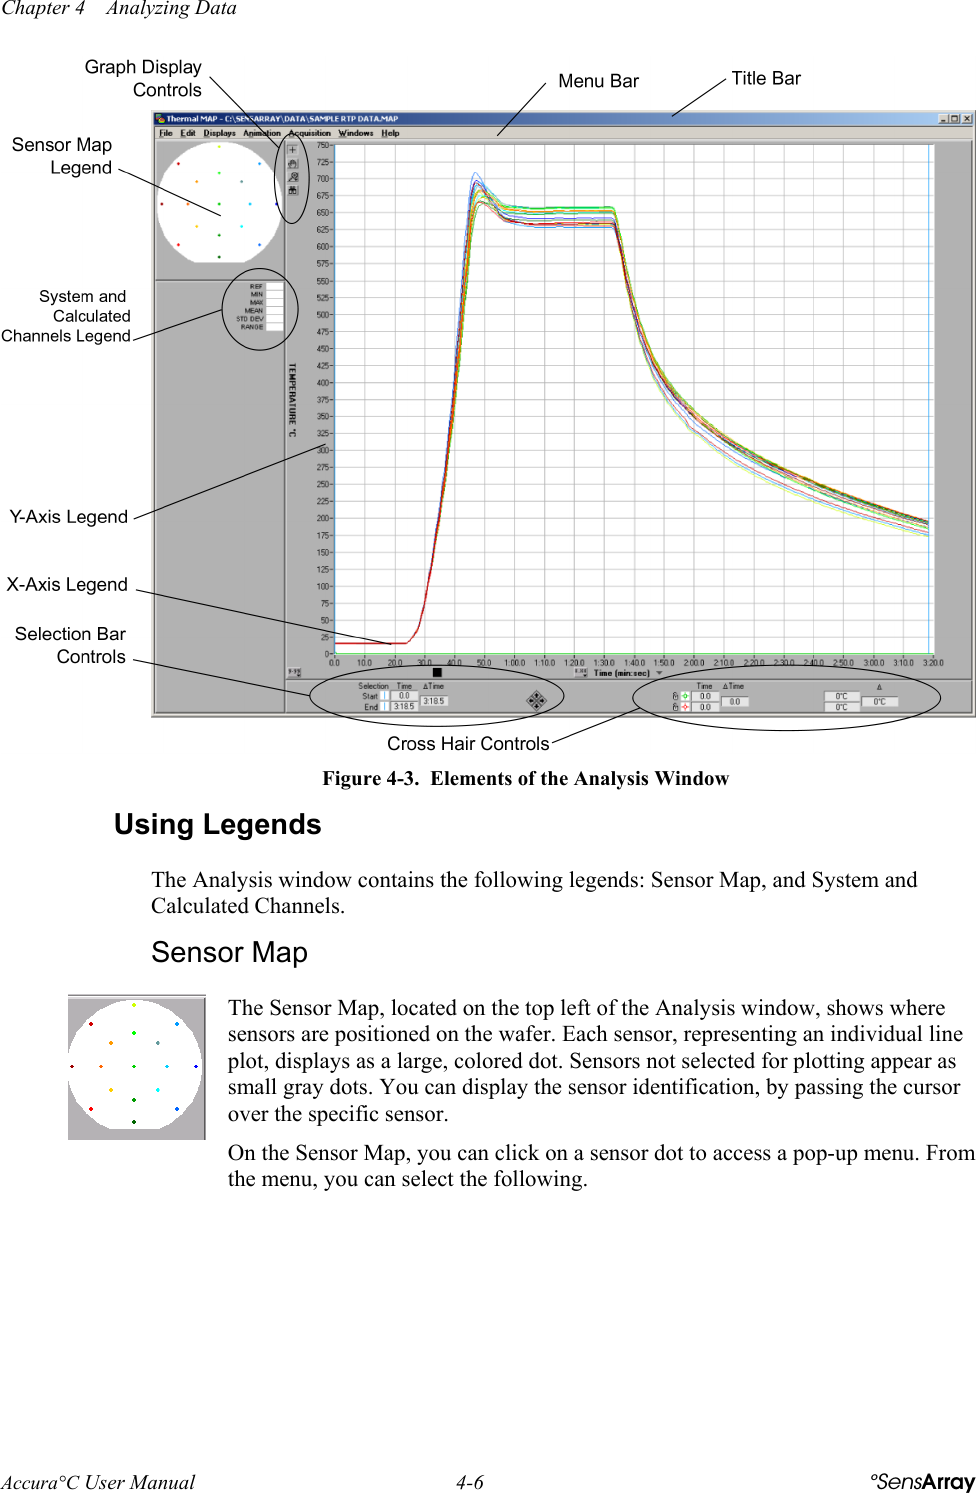 Chapter 4    Analyzing Data Accura°C User Manual  4-6  °SensArray  Figure 4-3.  Elements of the Analysis Window Using Legends The Analysis window contains the following legends: Sensor Map, and System and Calculated Channels. Sensor Map  The Sensor Map, located on the top left of the Analysis window, shows where sensors are positioned on the wafer. Each sensor, representing an individual line plot, displays as a large, colored dot. Sensors not selected for plotting appear as small gray dots. You can display the sensor identification, by passing the cursor over the specific sensor. On the Sensor Map, you can click on a sensor dot to access a pop-up menu. From the menu, you can select the following. 